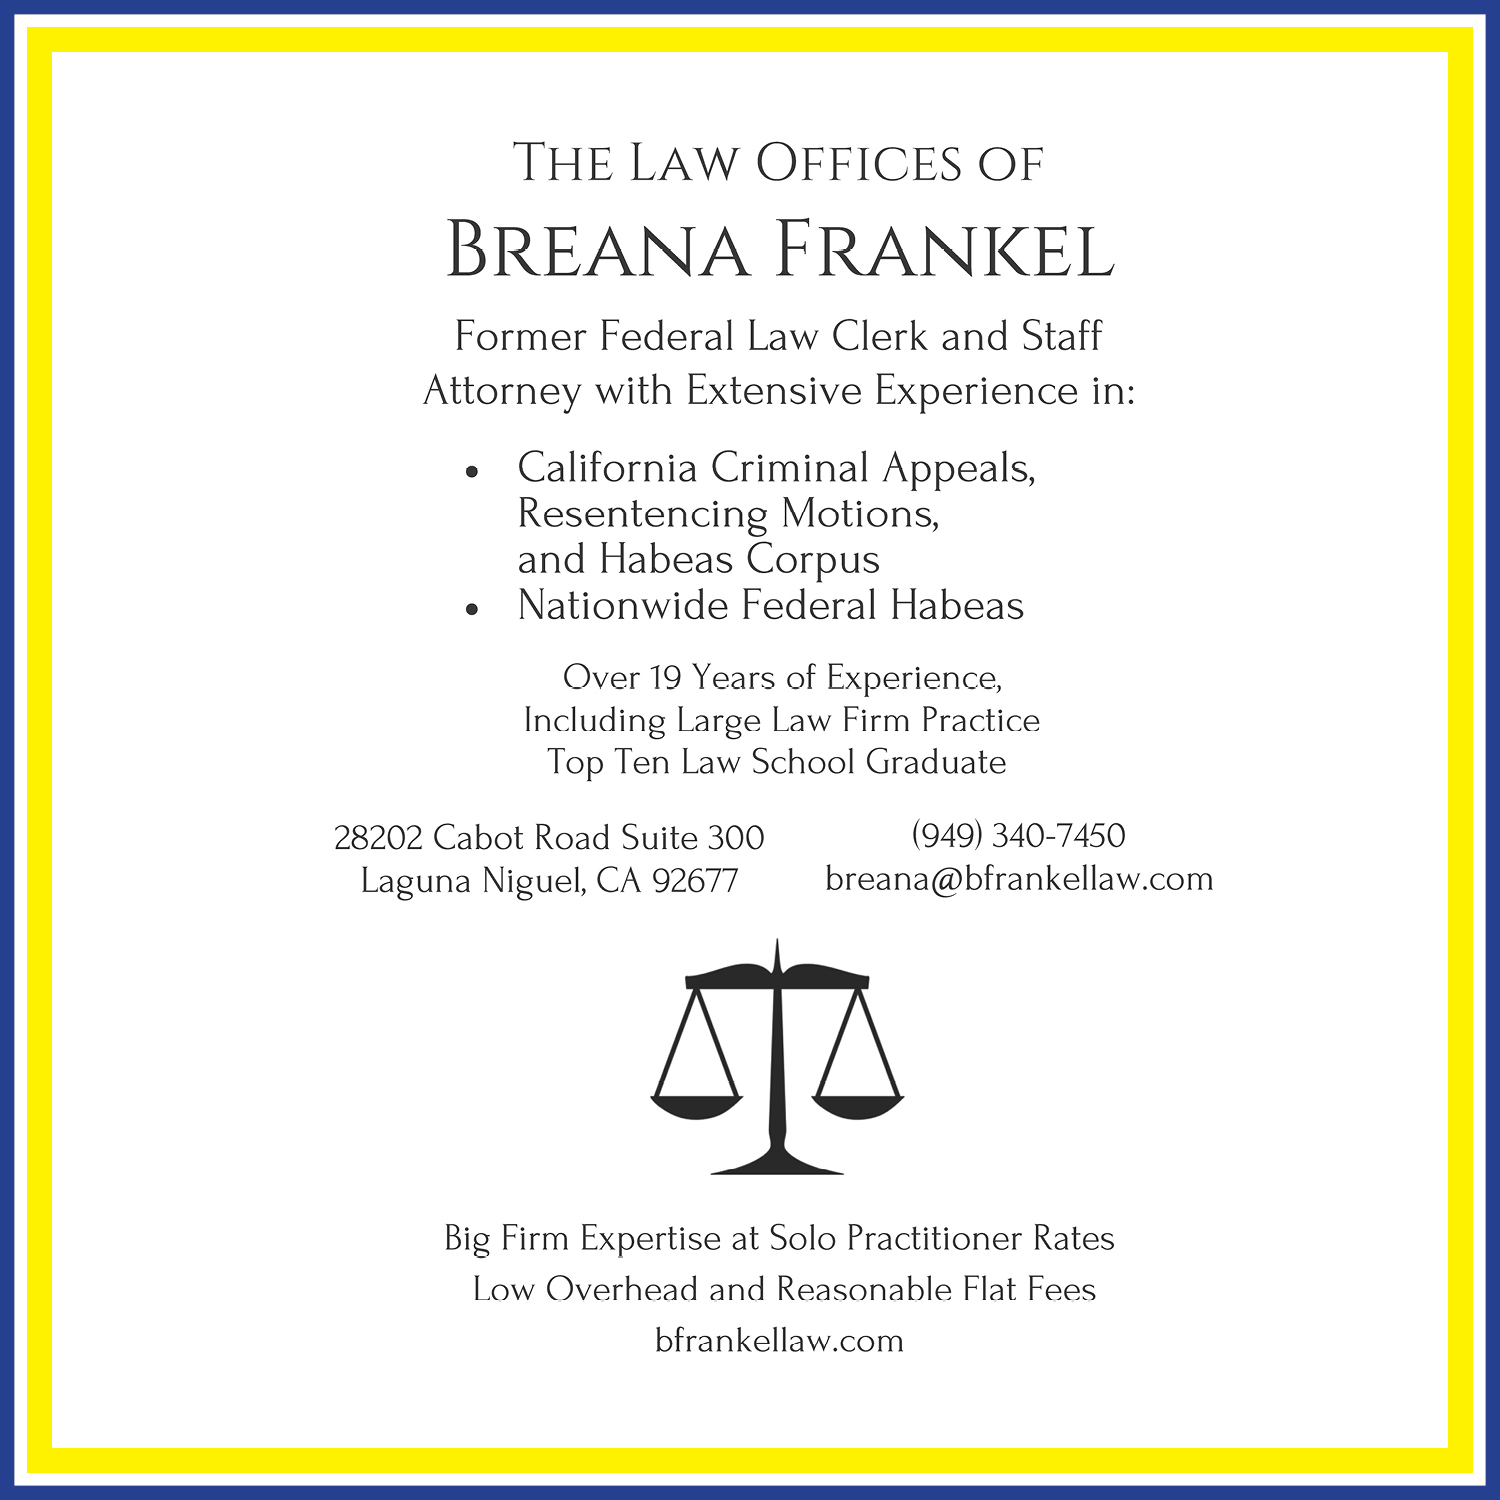 The Law Offices of Breana Frankel